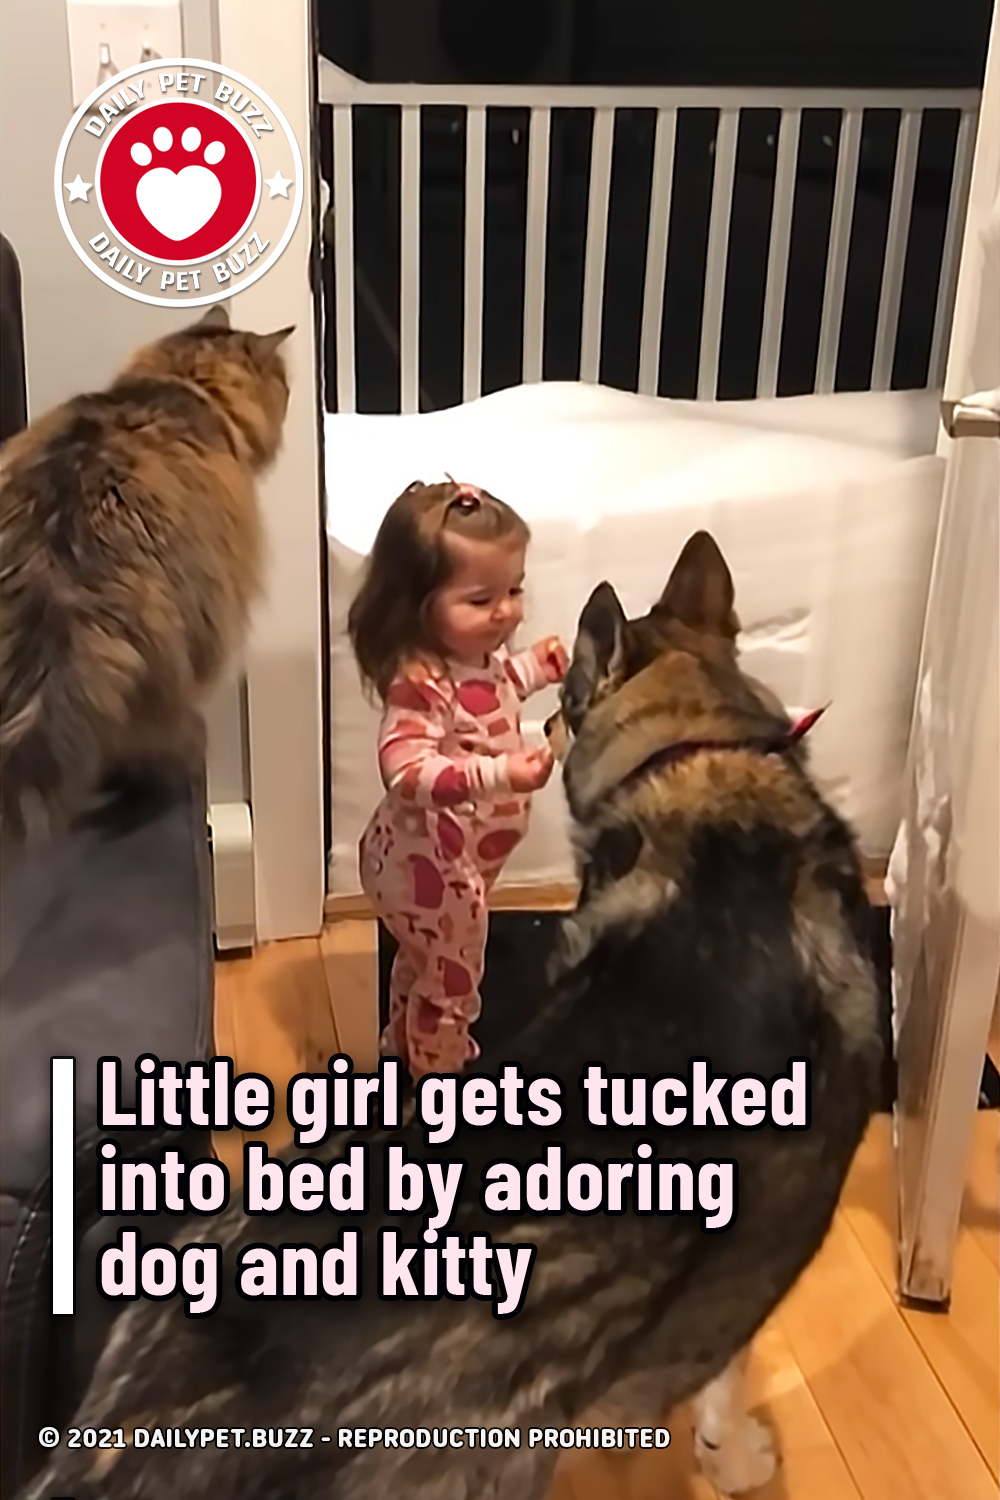 Little girl gets tucked into bed by adoring dog and kitty